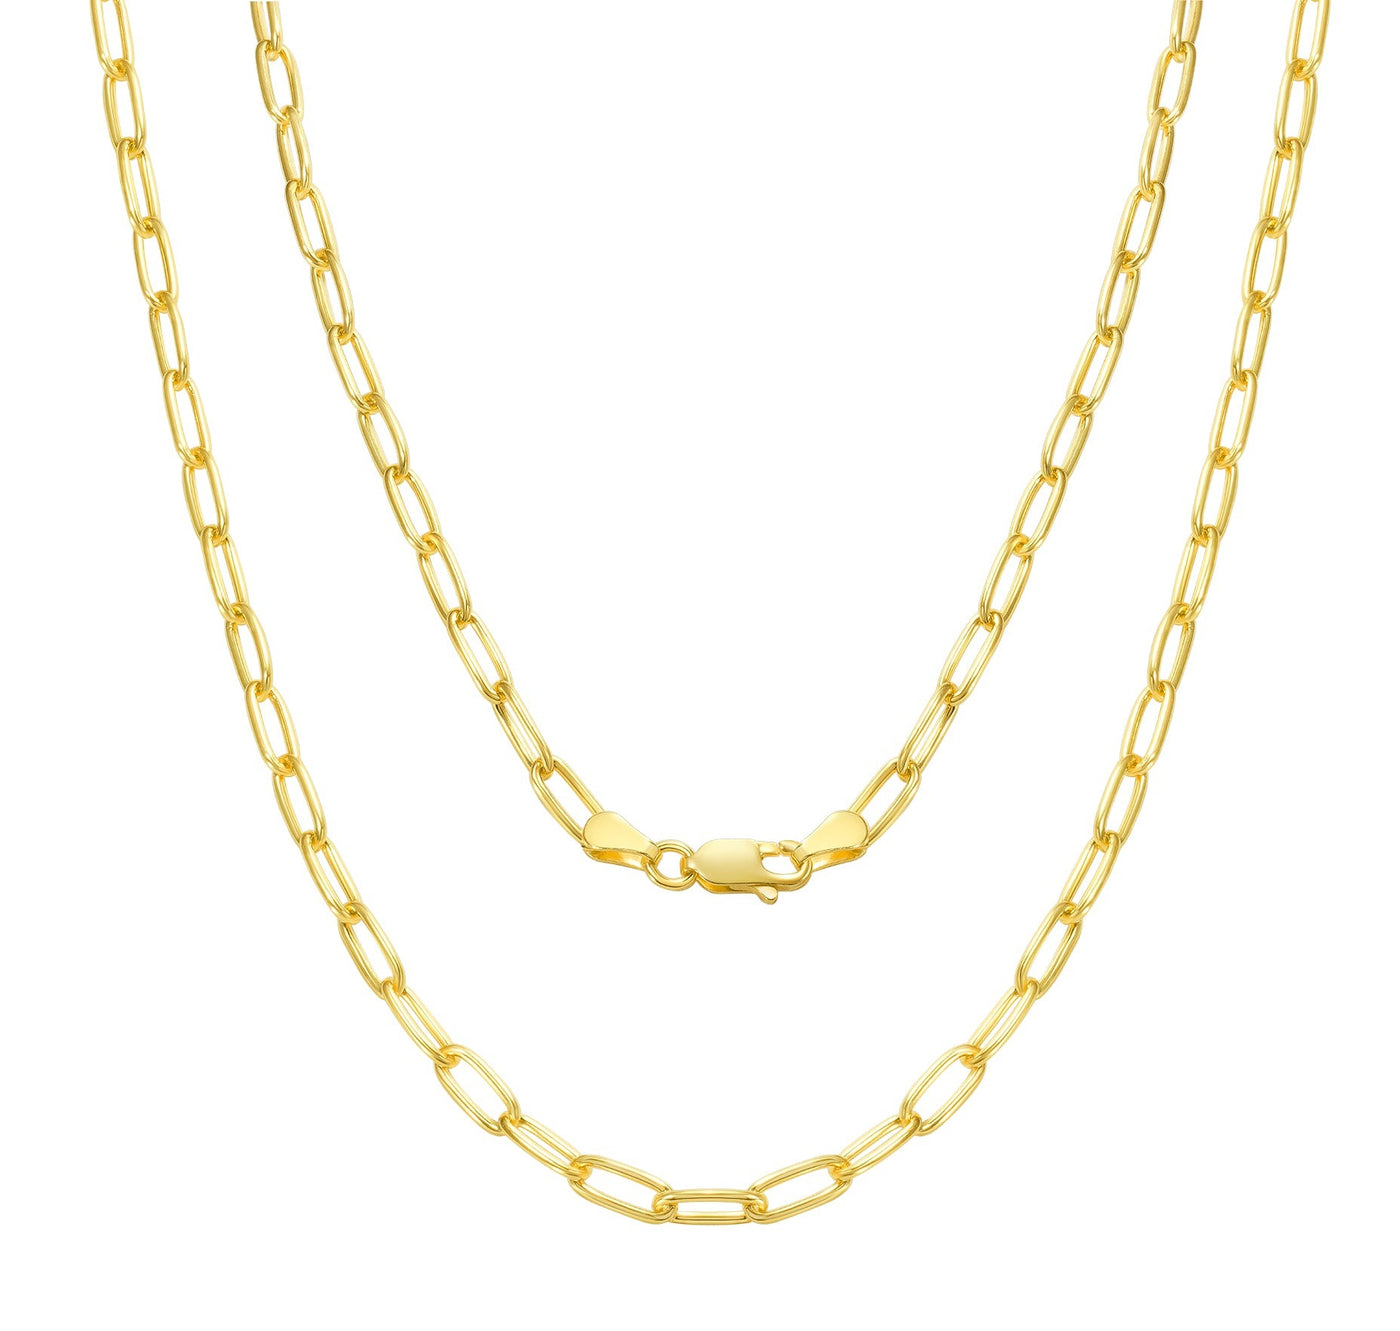 Italian Sterling Silver Gold Plated 3.5mm Paperclip Link Chain Necklace Bracelet, 7" - 24"